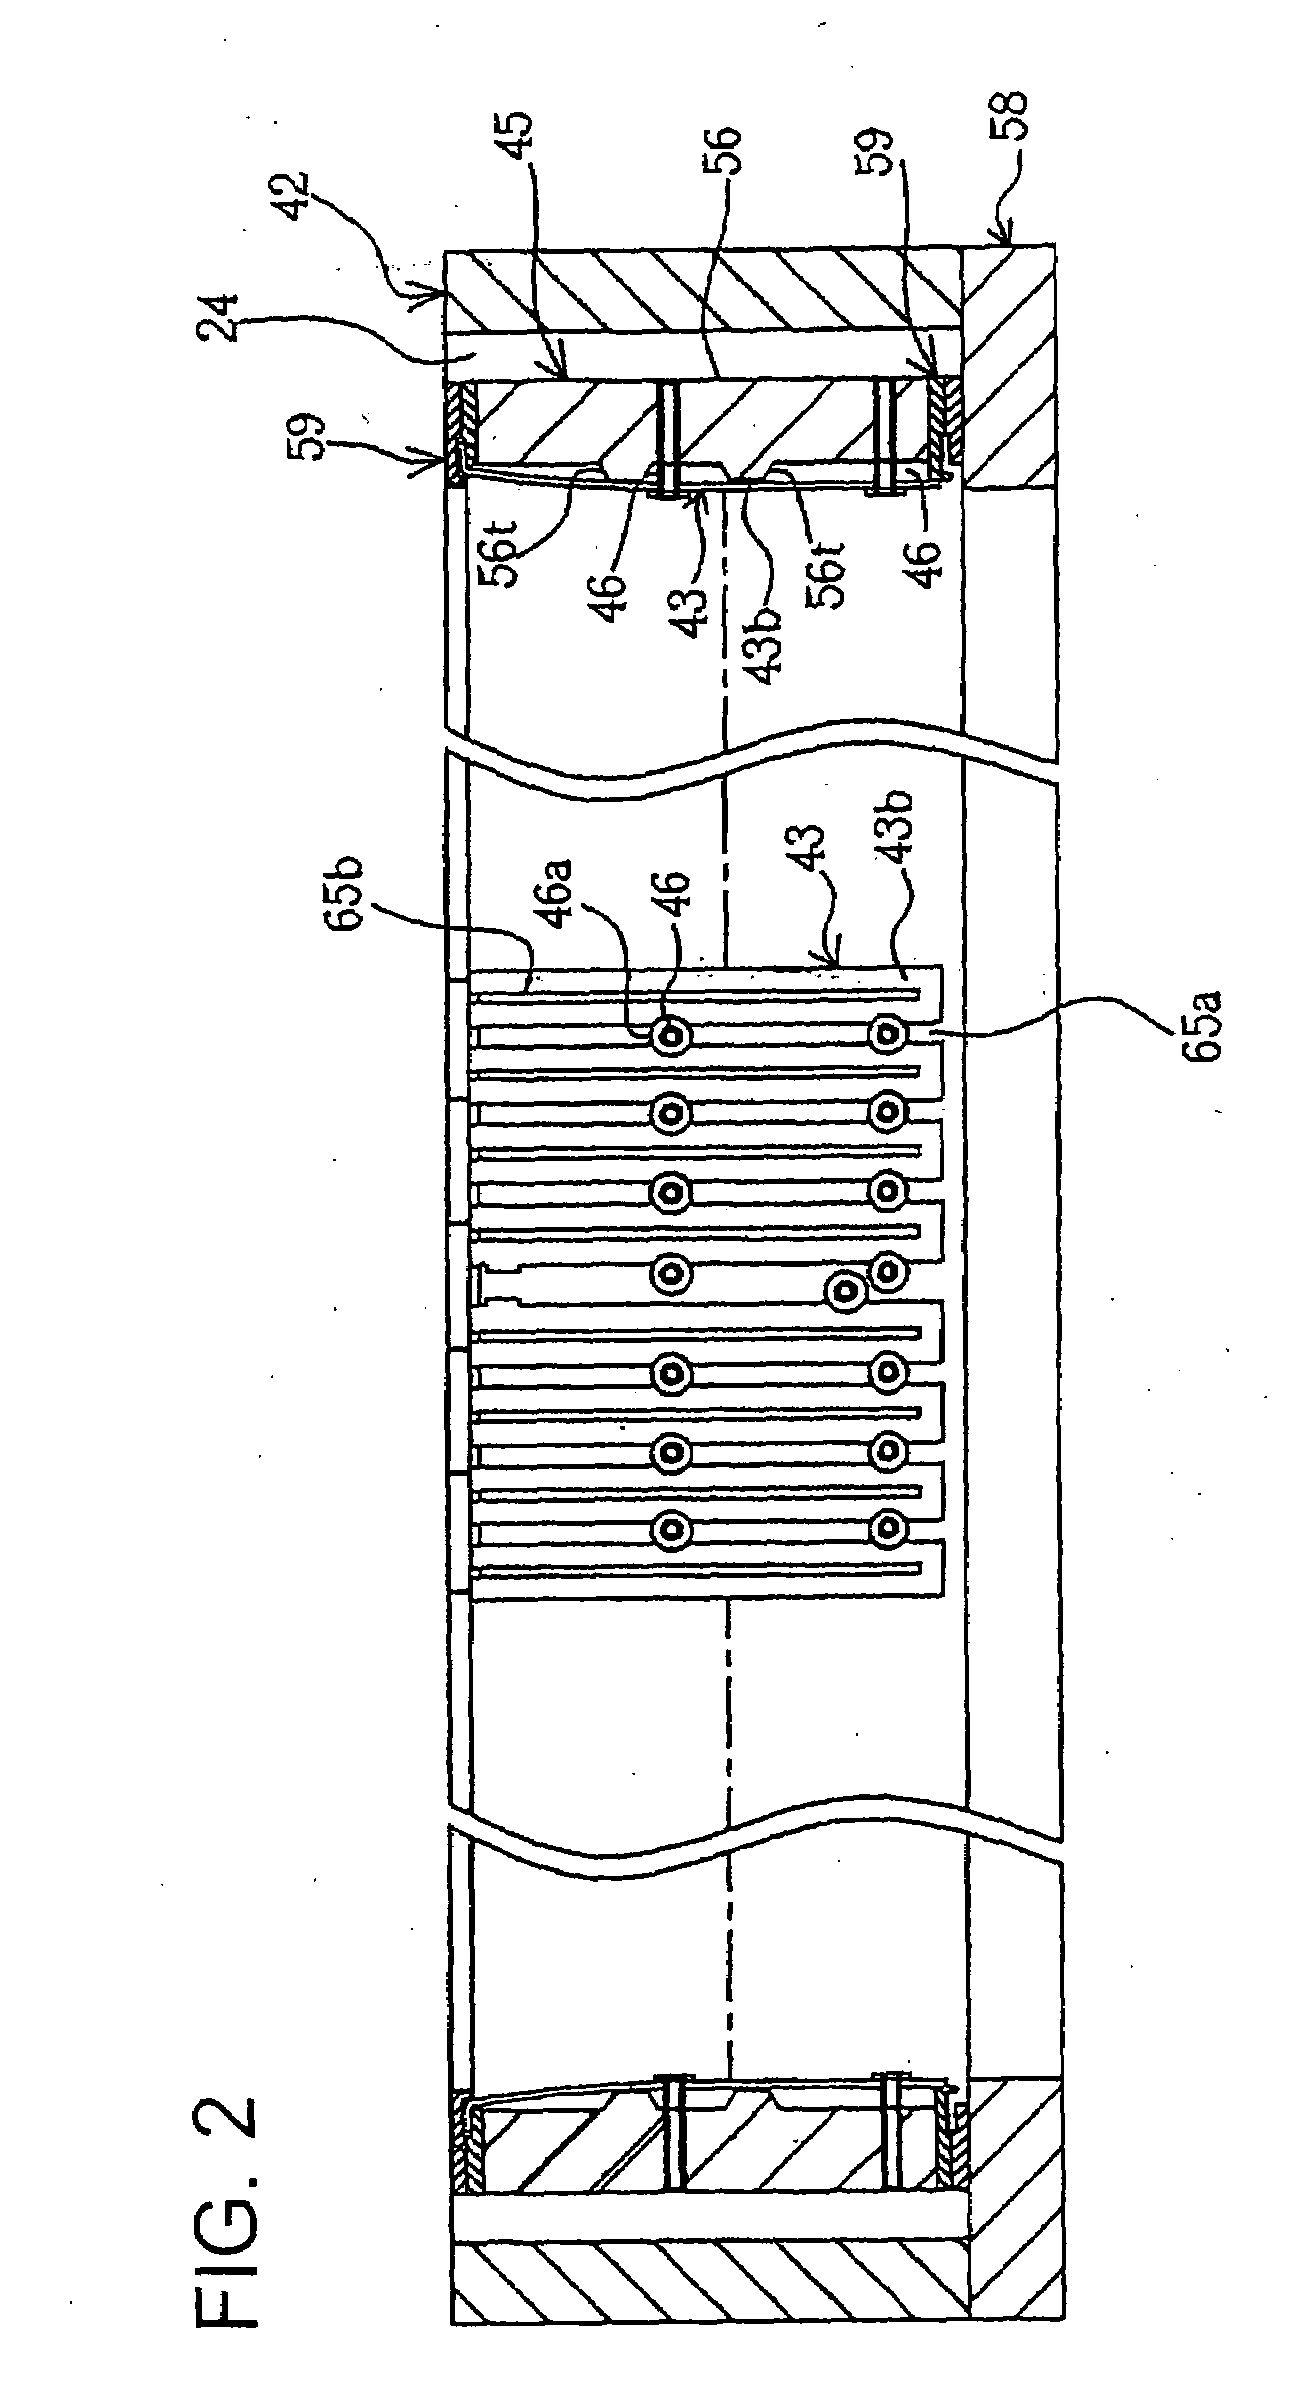 Substrate processing apparatus, heating apparatus for use in the same, method of manufacturing semiconductors with those apparatuses, and heating element supporting structure